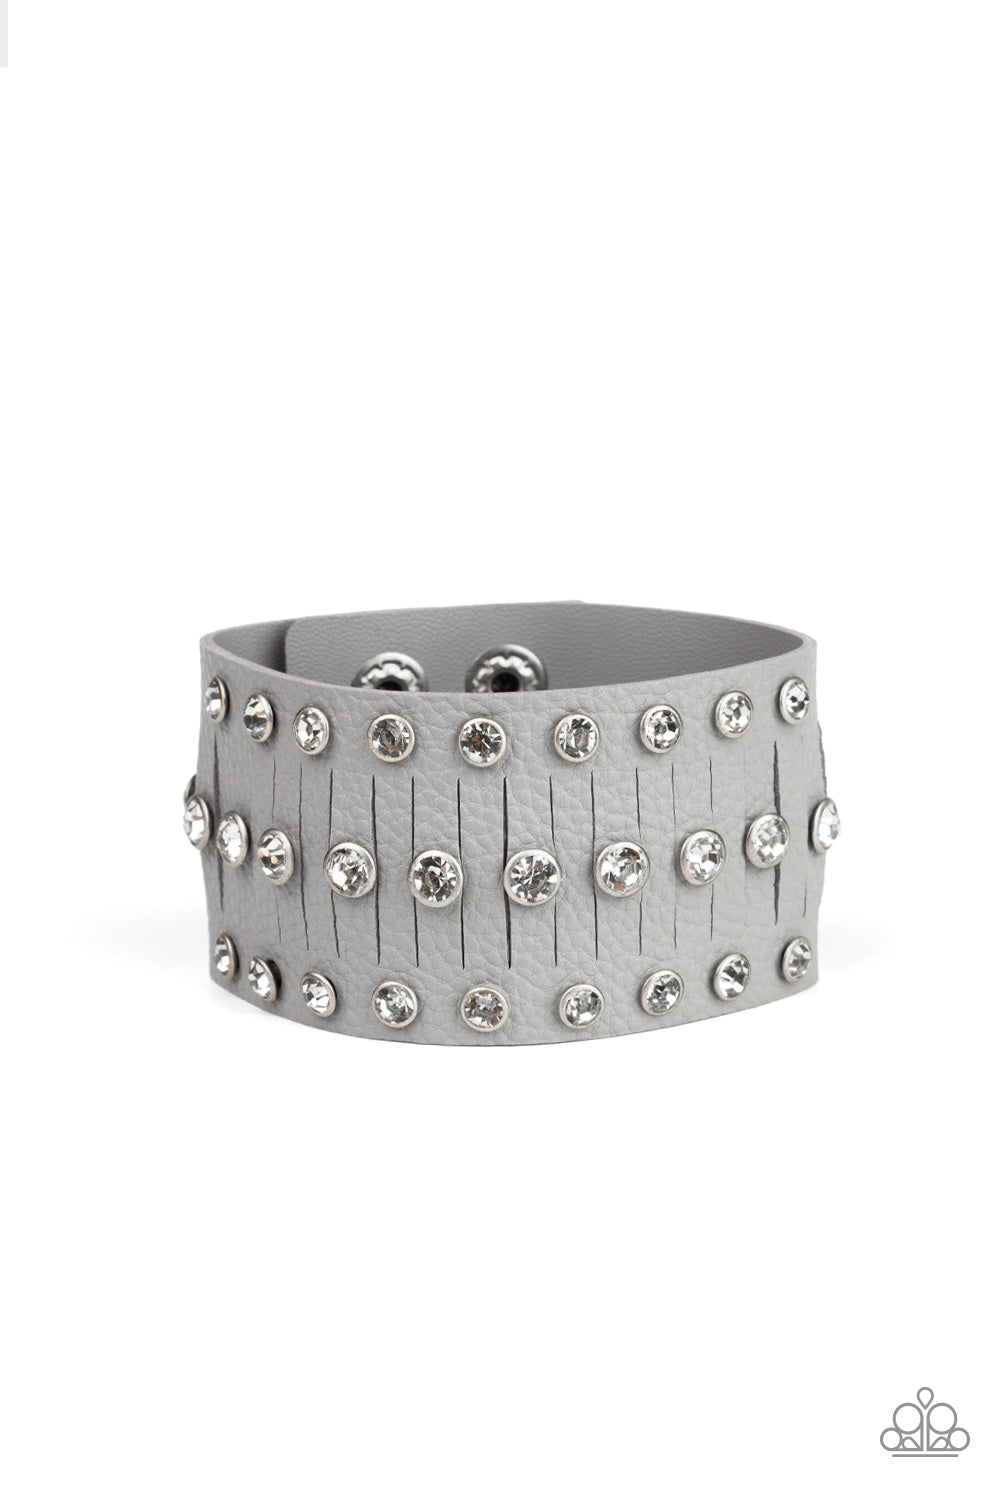 Now Taking The Stage - Silver wrap bracelet